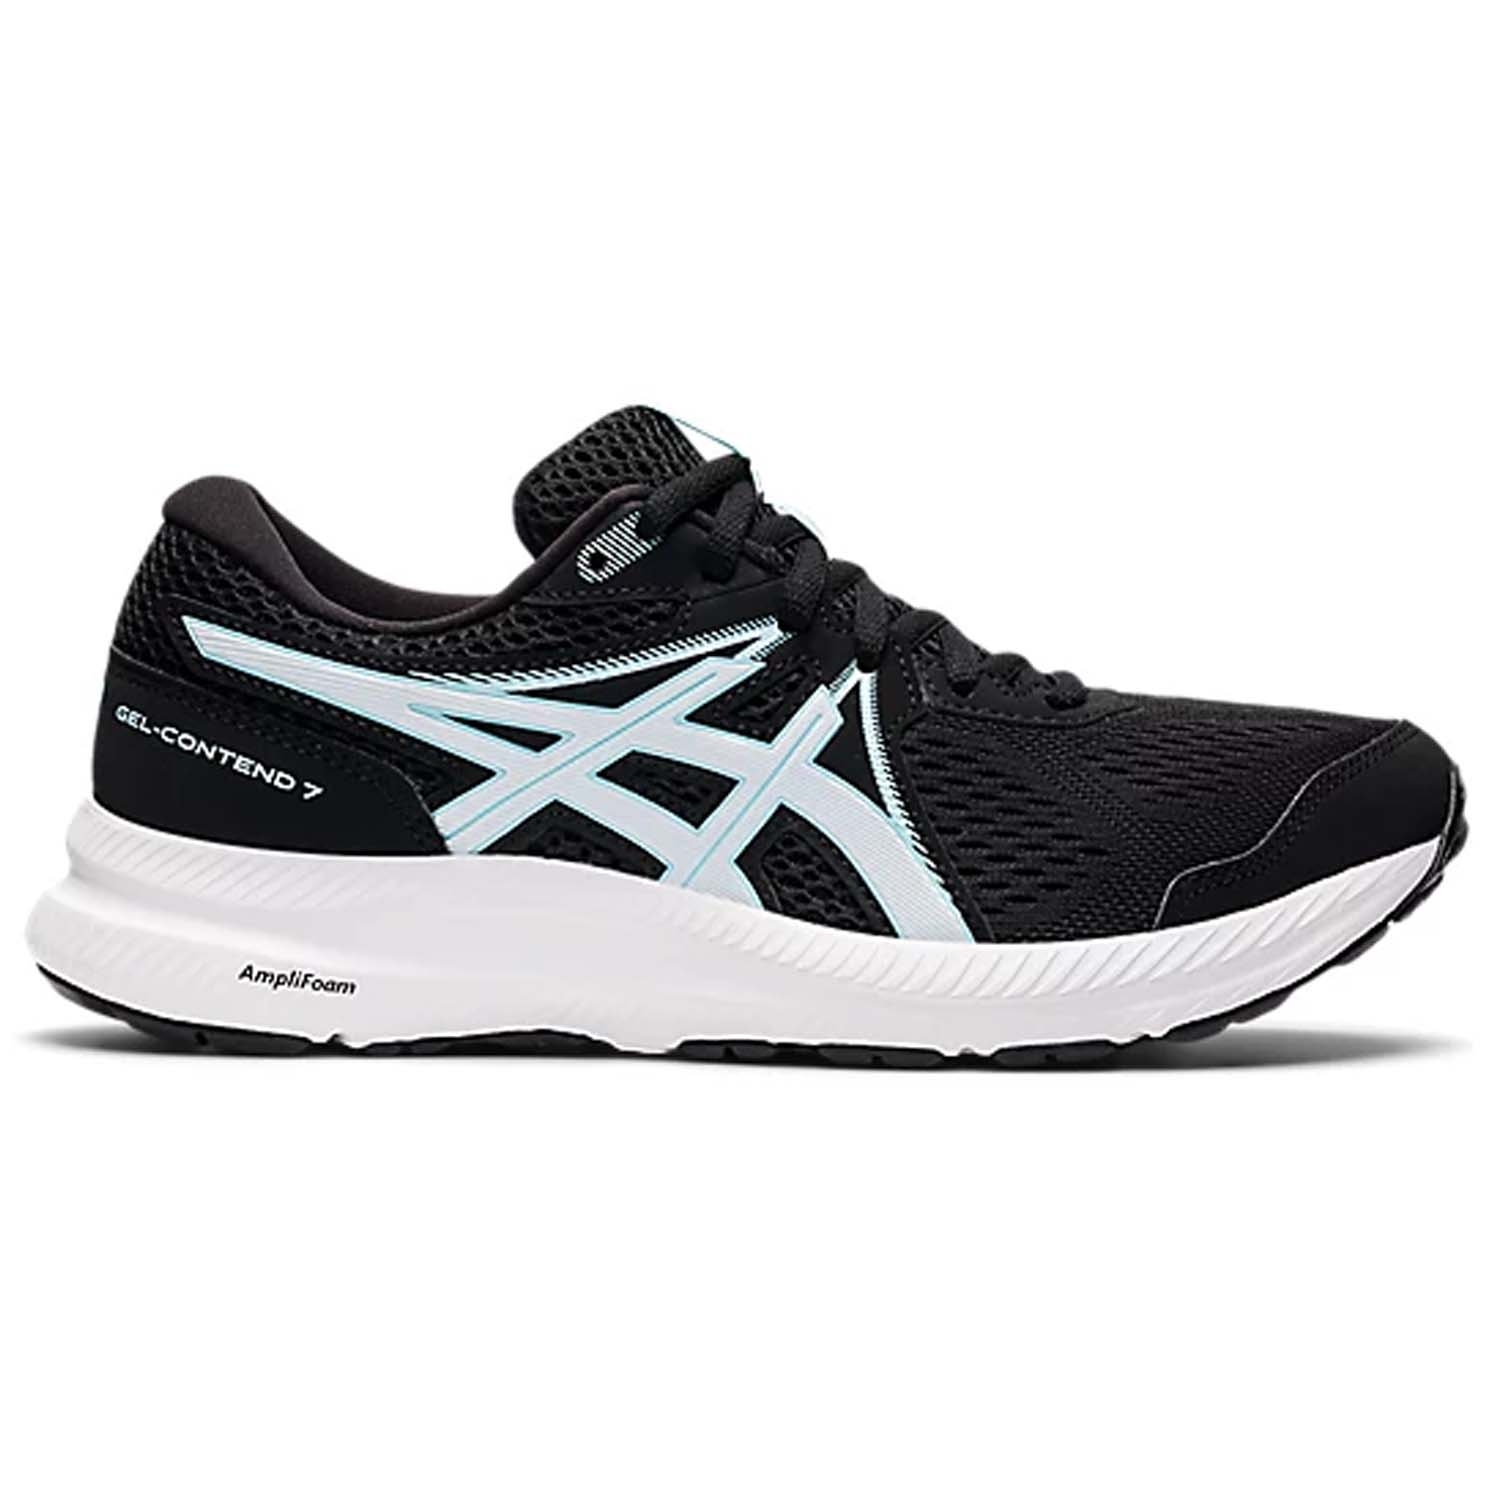 Asics Gel-Contend 7 Womens Running Shoes: Black/Clear Blue | Mike ...